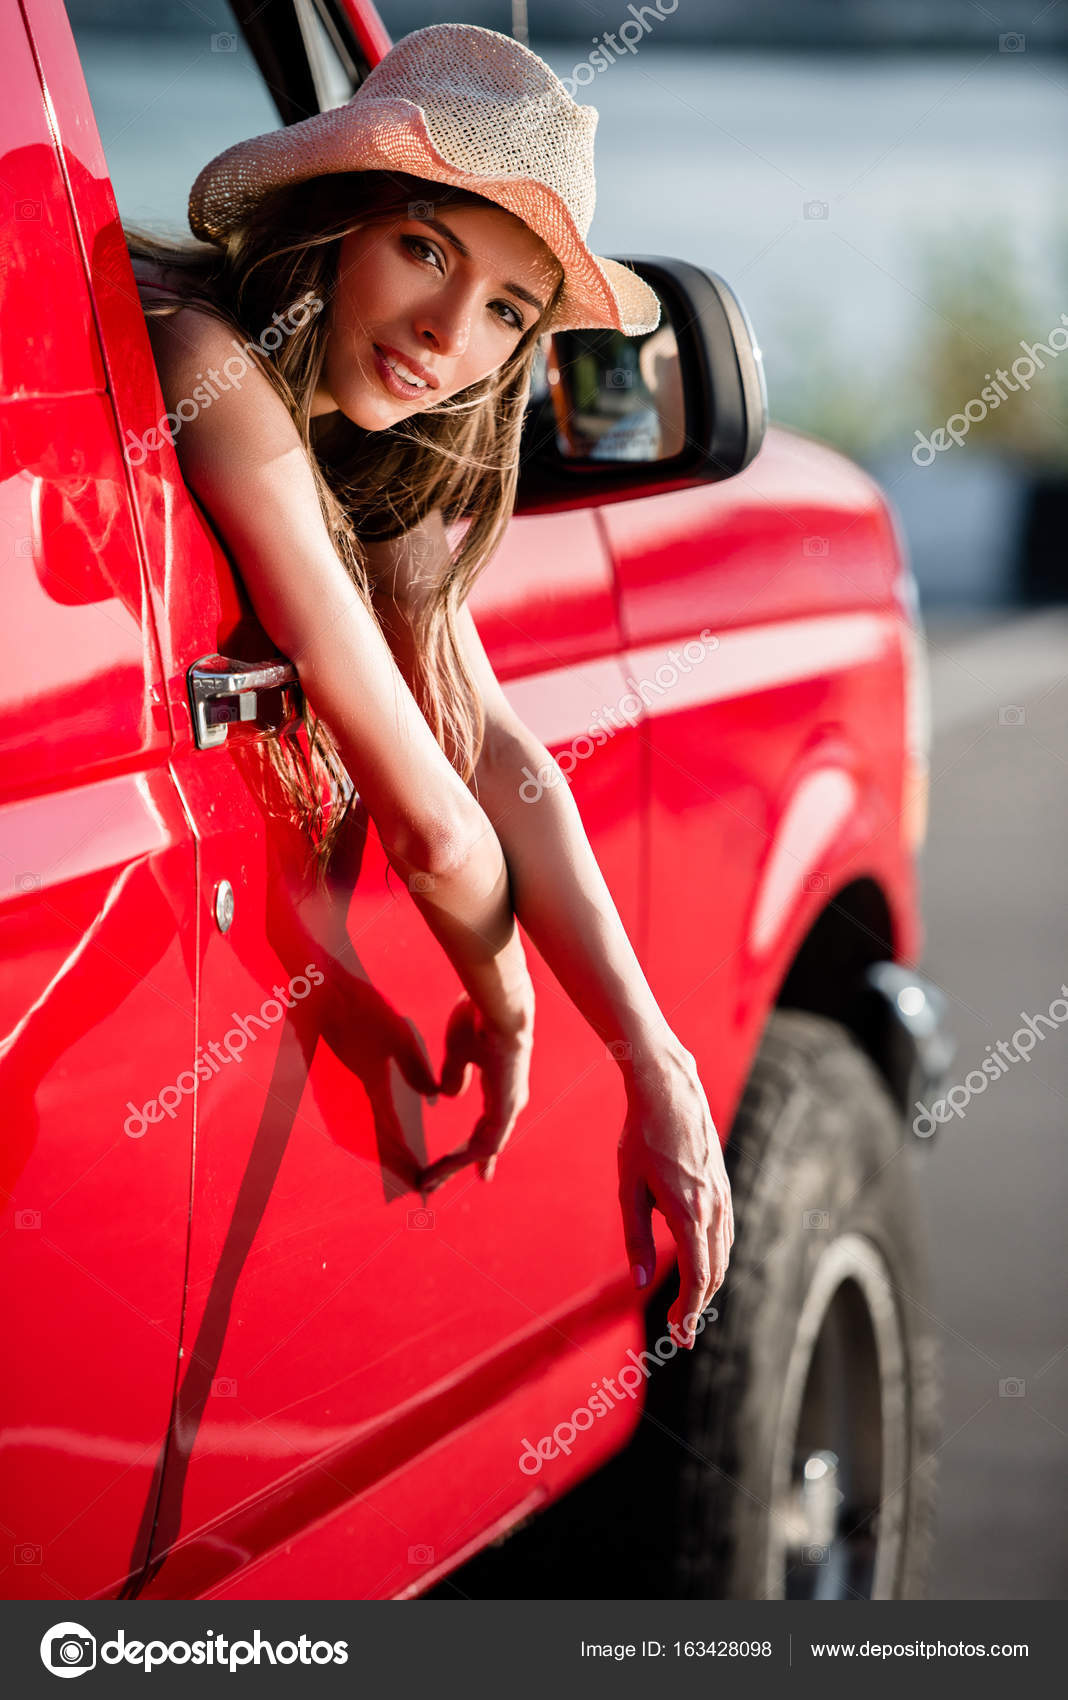 depositphotos_163428098-stock-photo-woman-looking-out-of-car.jpg